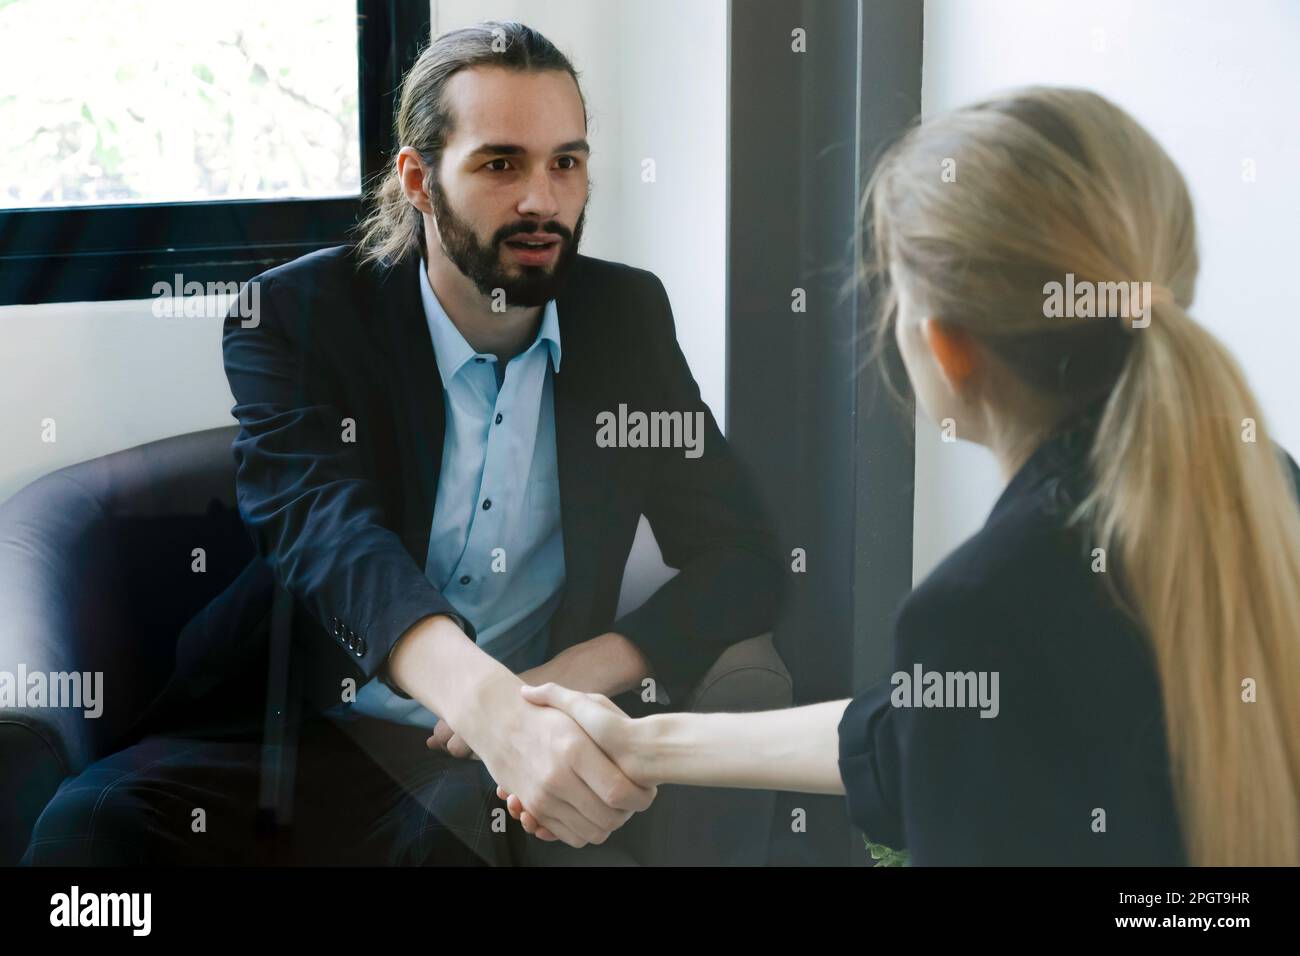 Smiling success young businessman talking and interview with secretory or reporter. Business meeting and young entrepreneur. Stock Photo